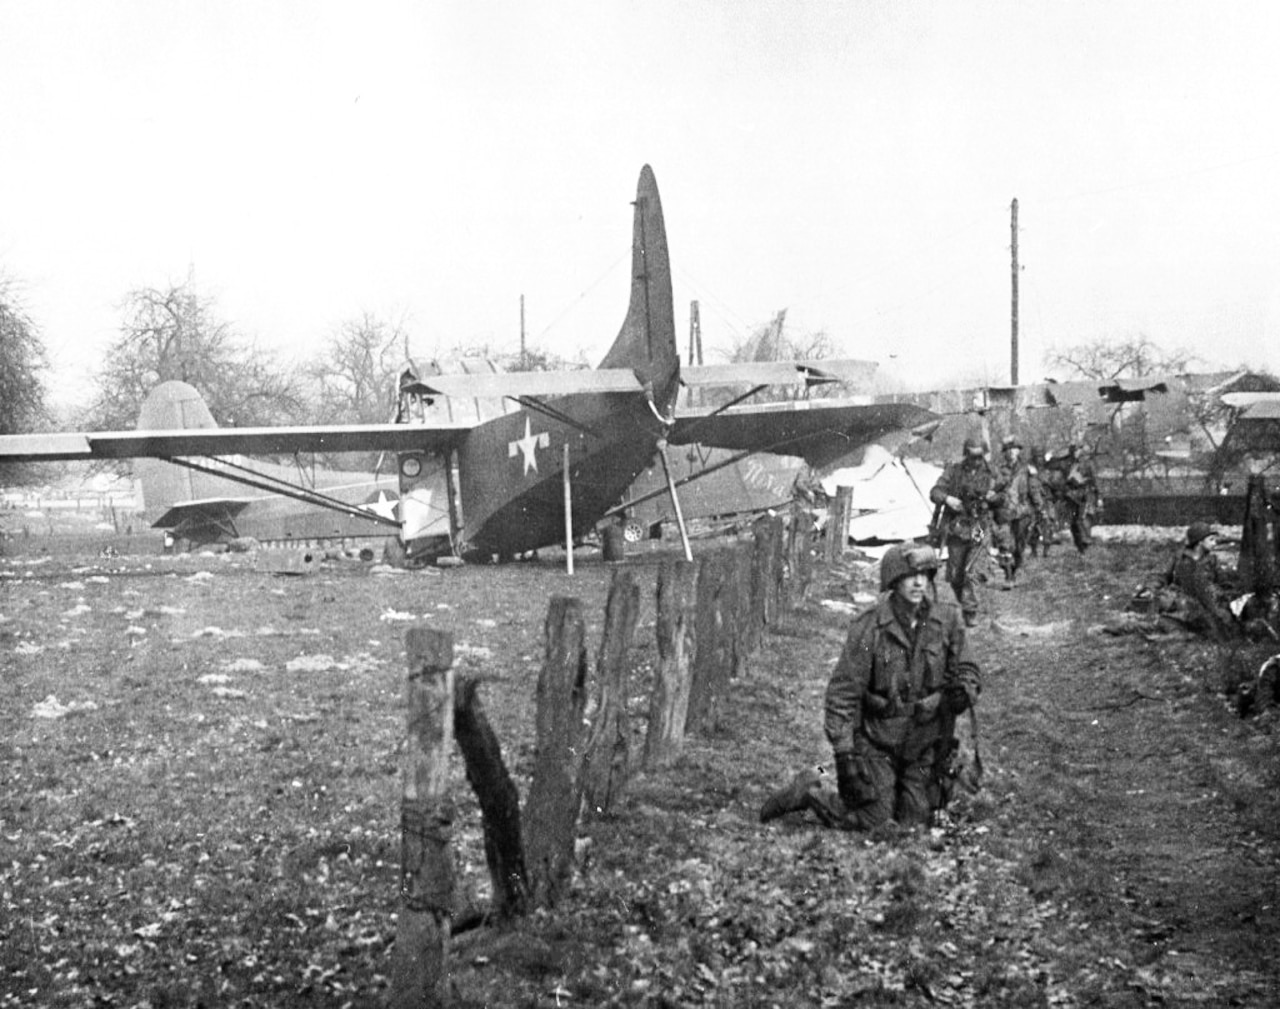 Troops move down a dirt road away from an airplane.